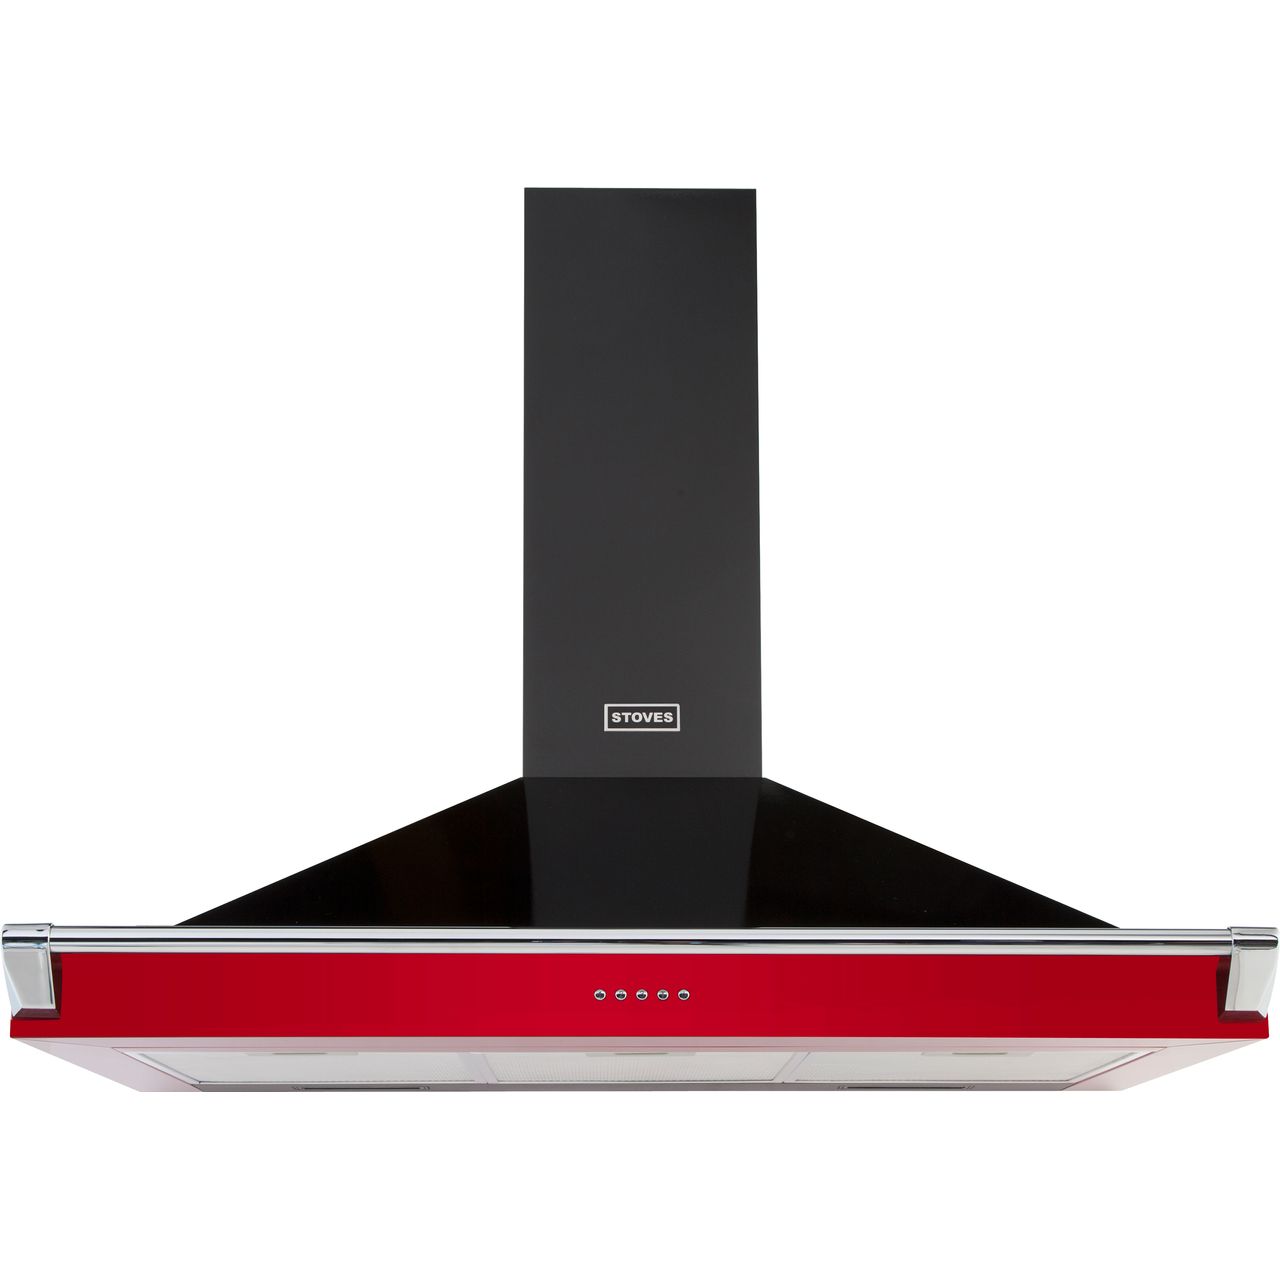 Stoves S1000 RICH CHIM RAIL 100 cm Chimney Cooker Hood Review